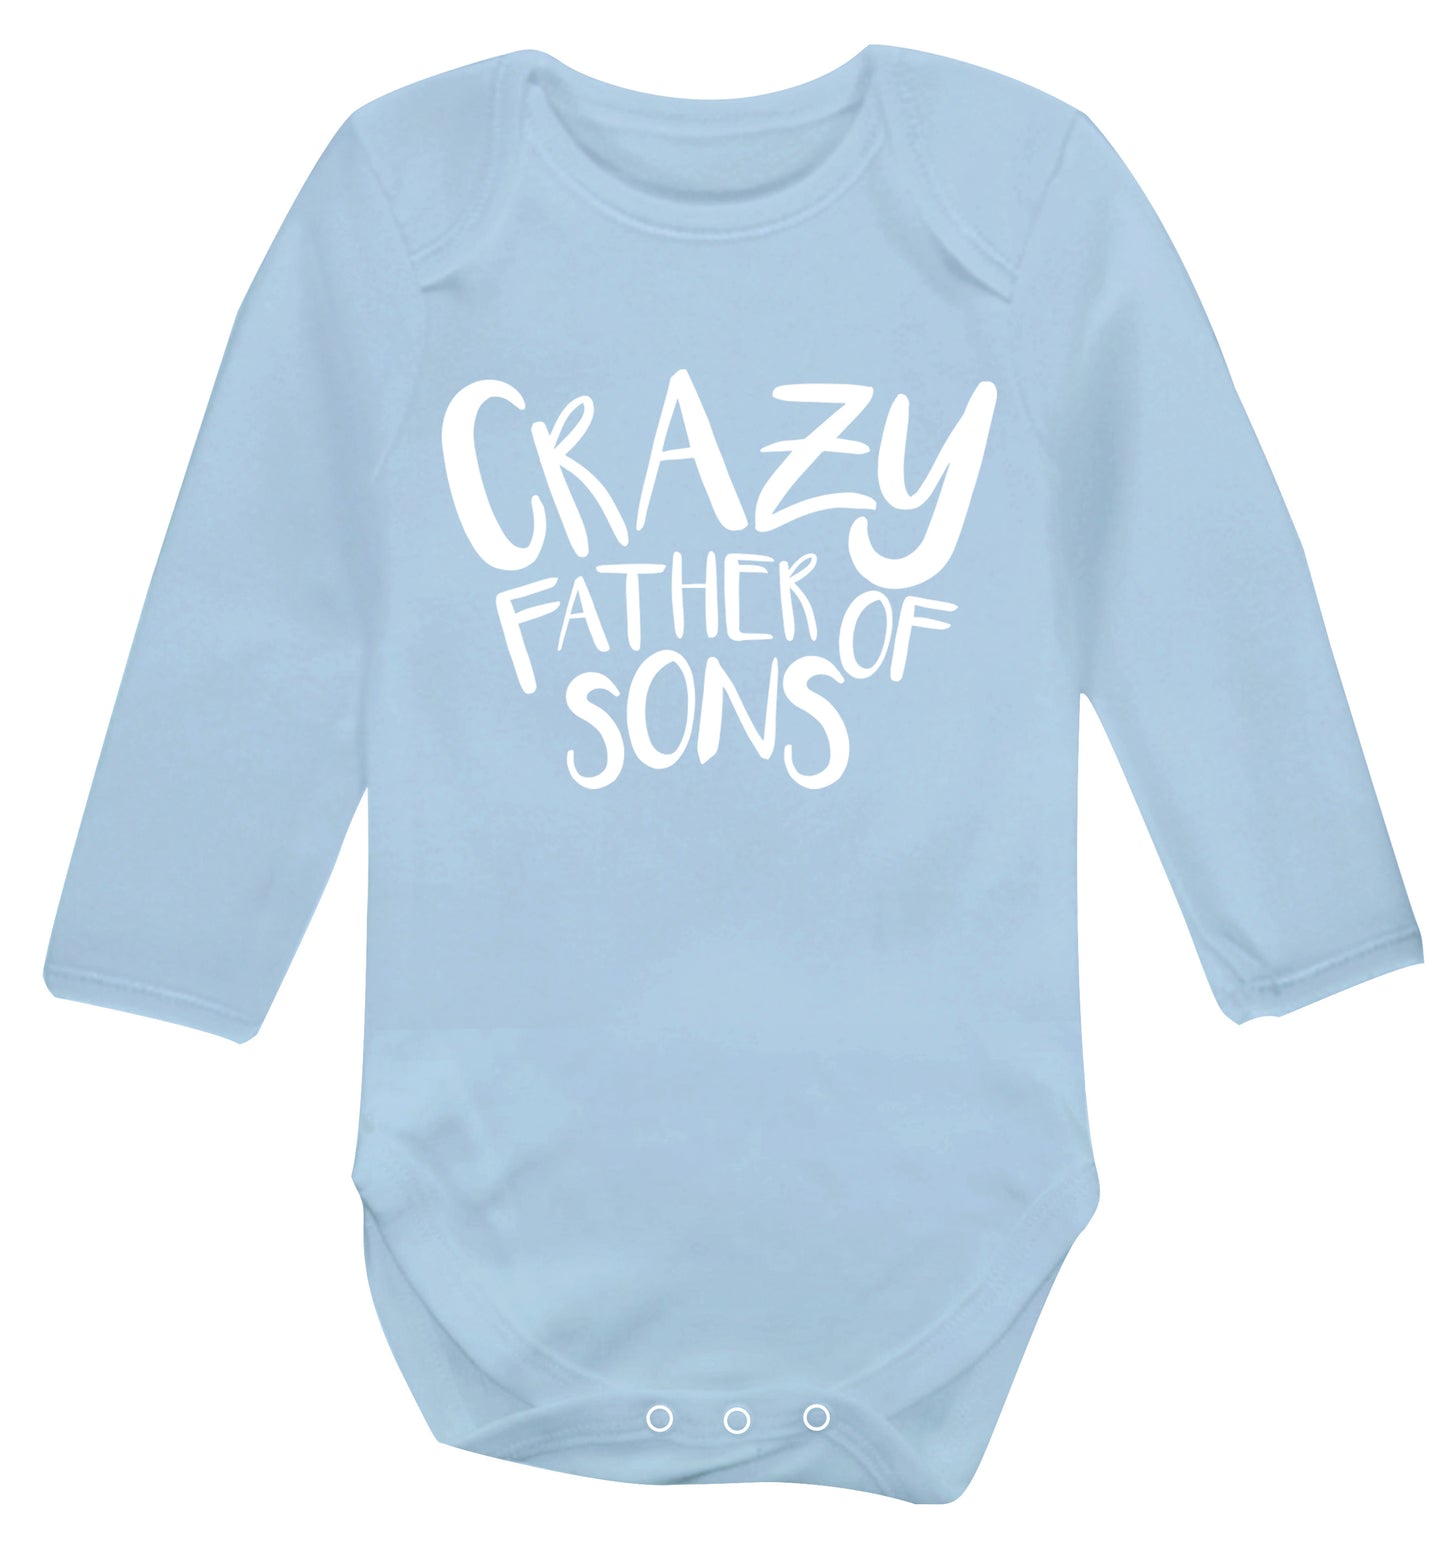 Crazy father of sons Baby Vest long sleeved pale blue 6-12 months